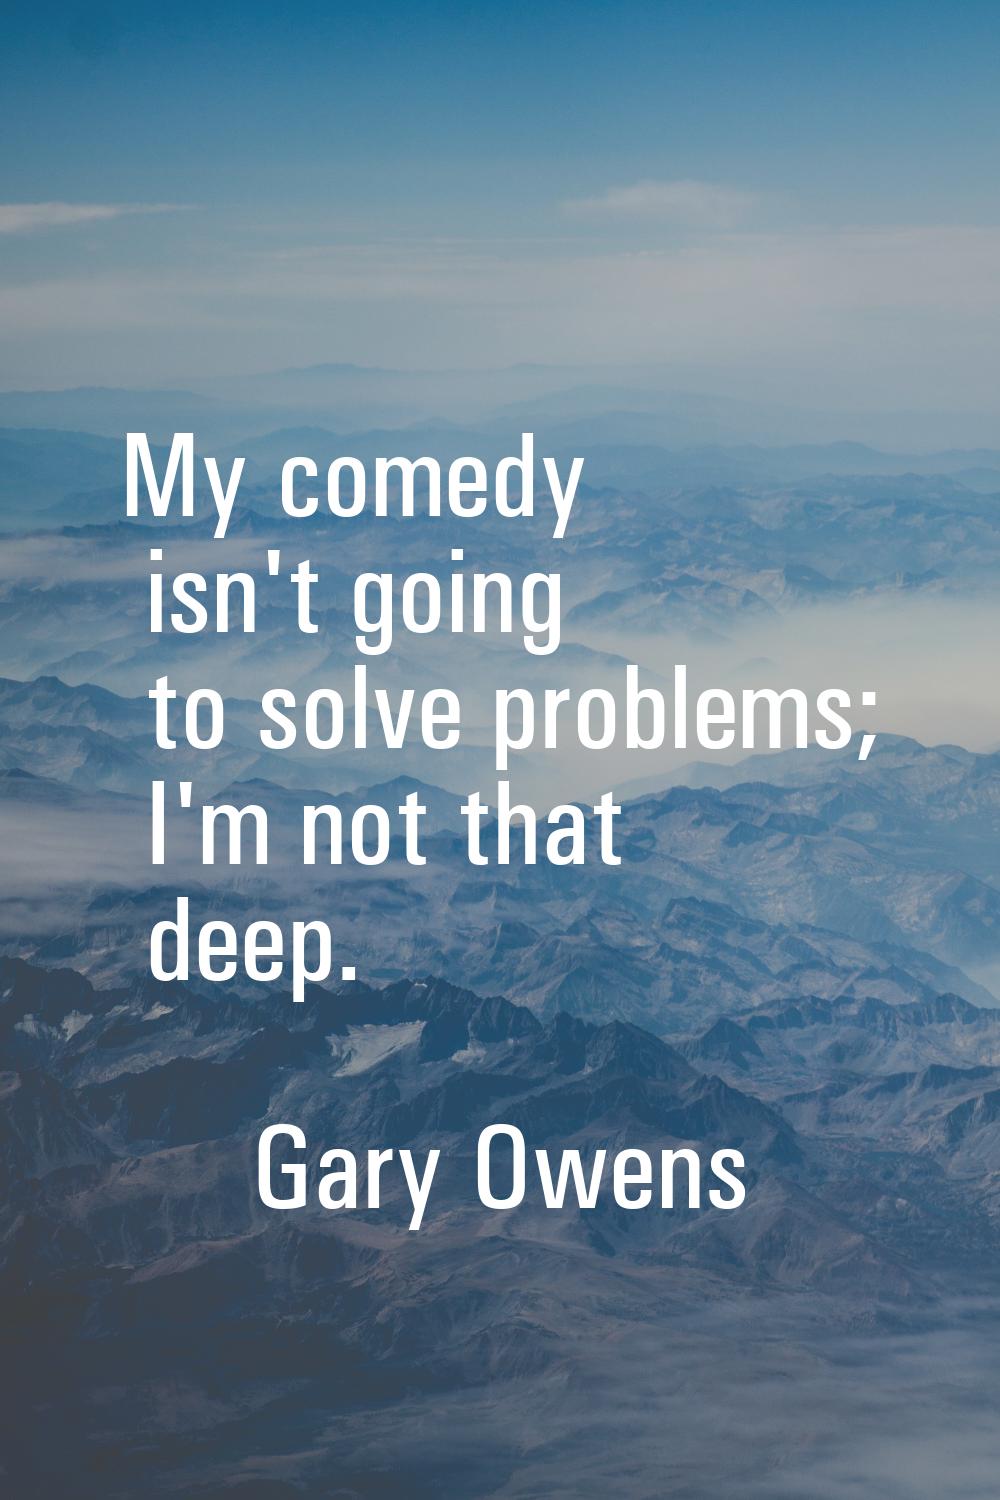 My comedy isn't going to solve problems; I'm not that deep.